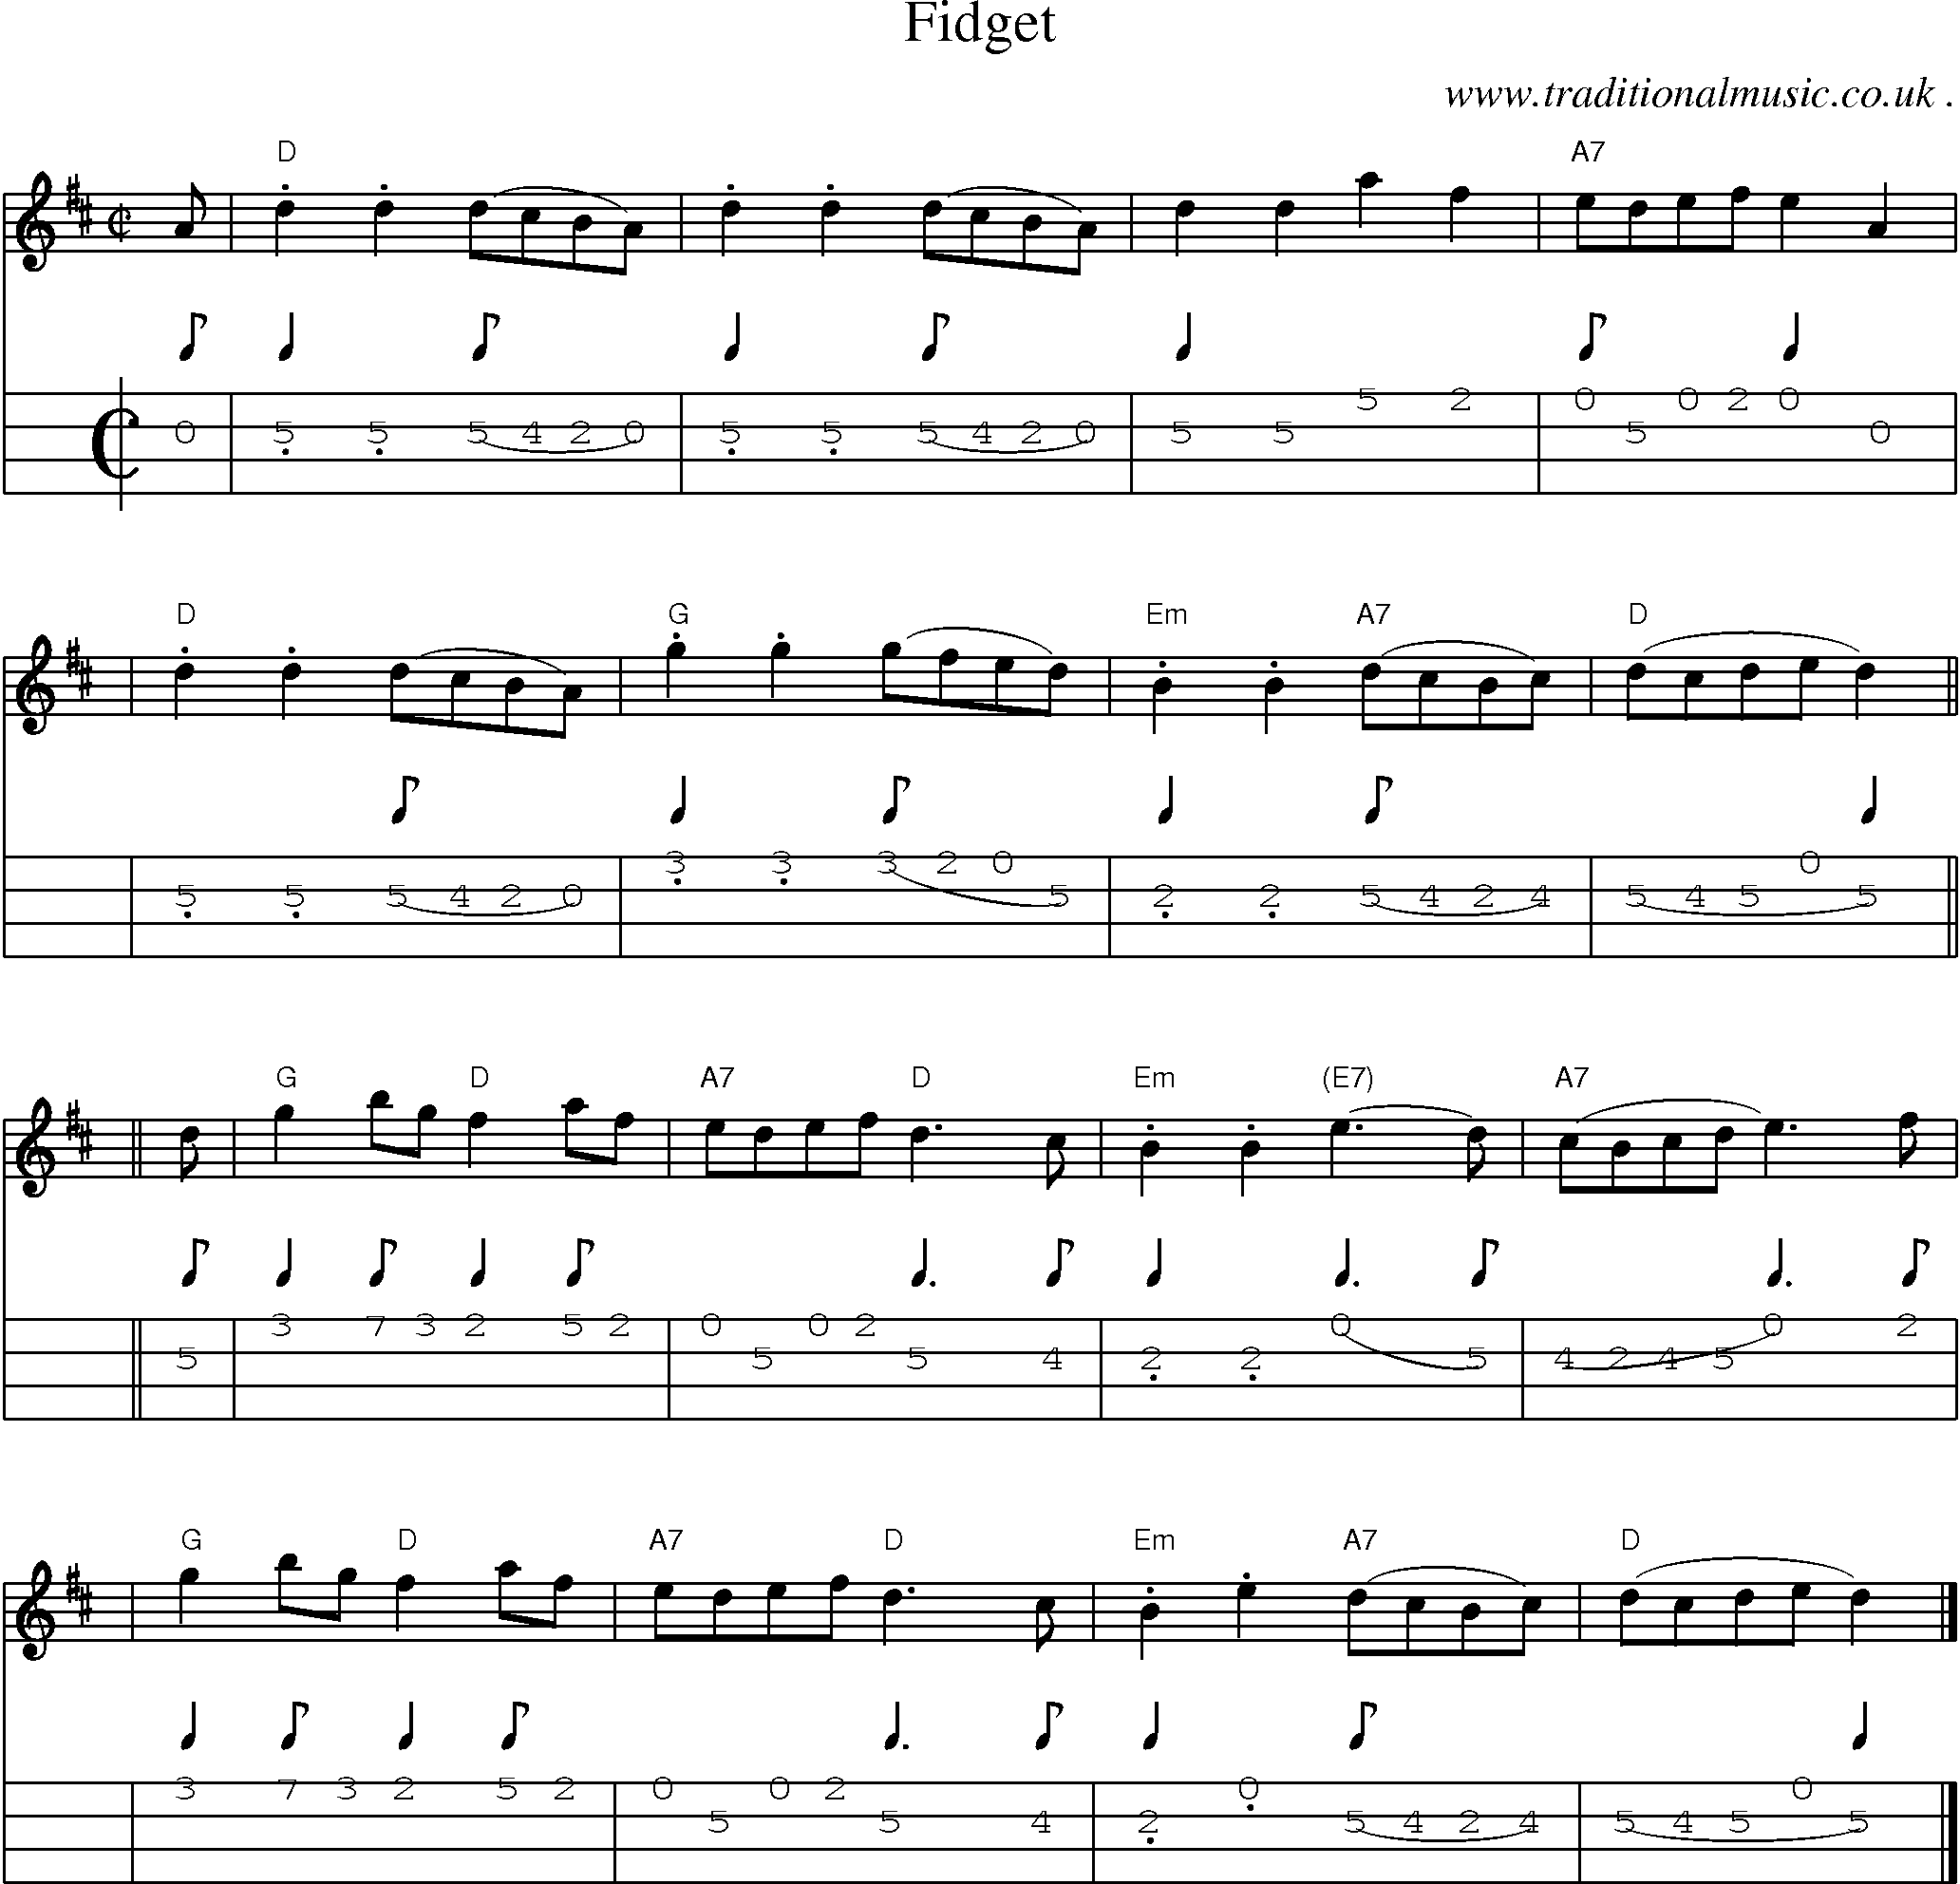 Sheet-music  score, Chords and Mandolin Tabs for Fidget